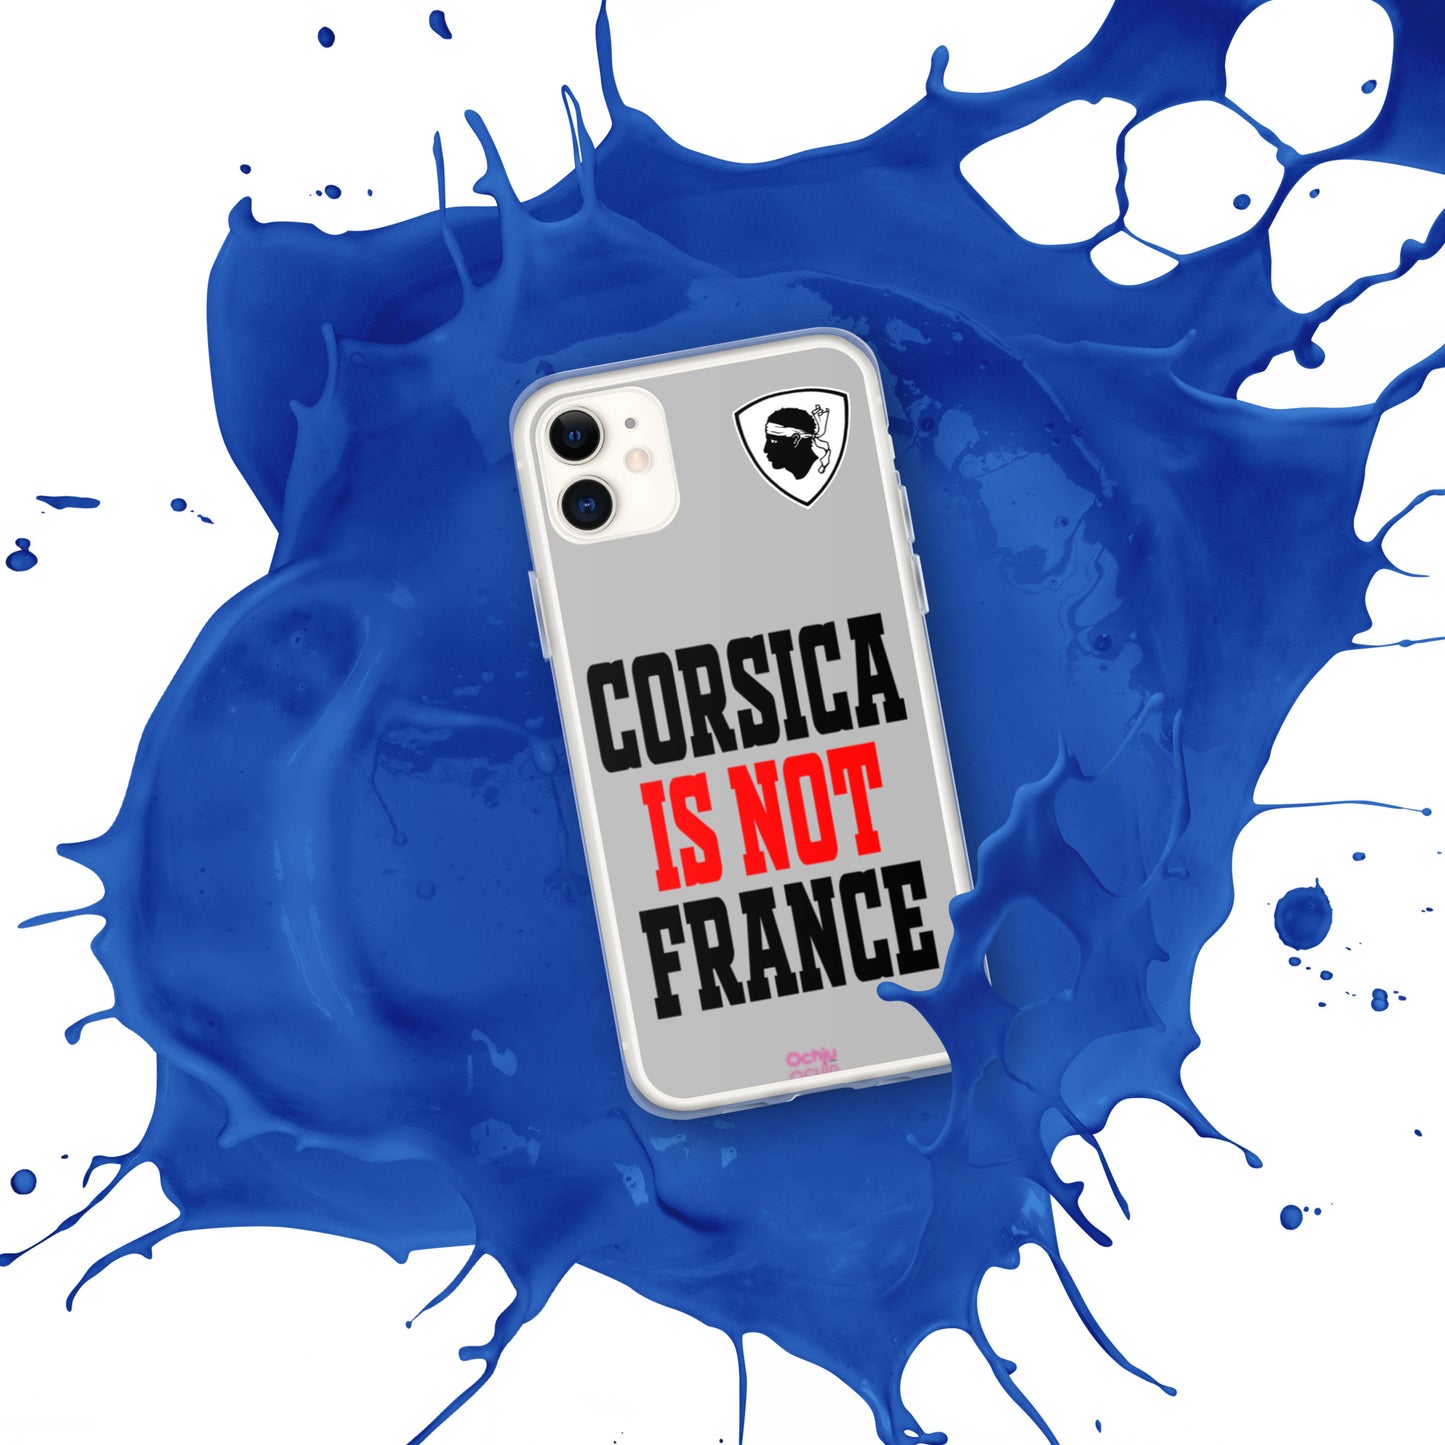 Coque pour iPhone Corsica is not France - Ochju Ochju iPhone 11 Ochju Coque pour iPhone Corsica is not France